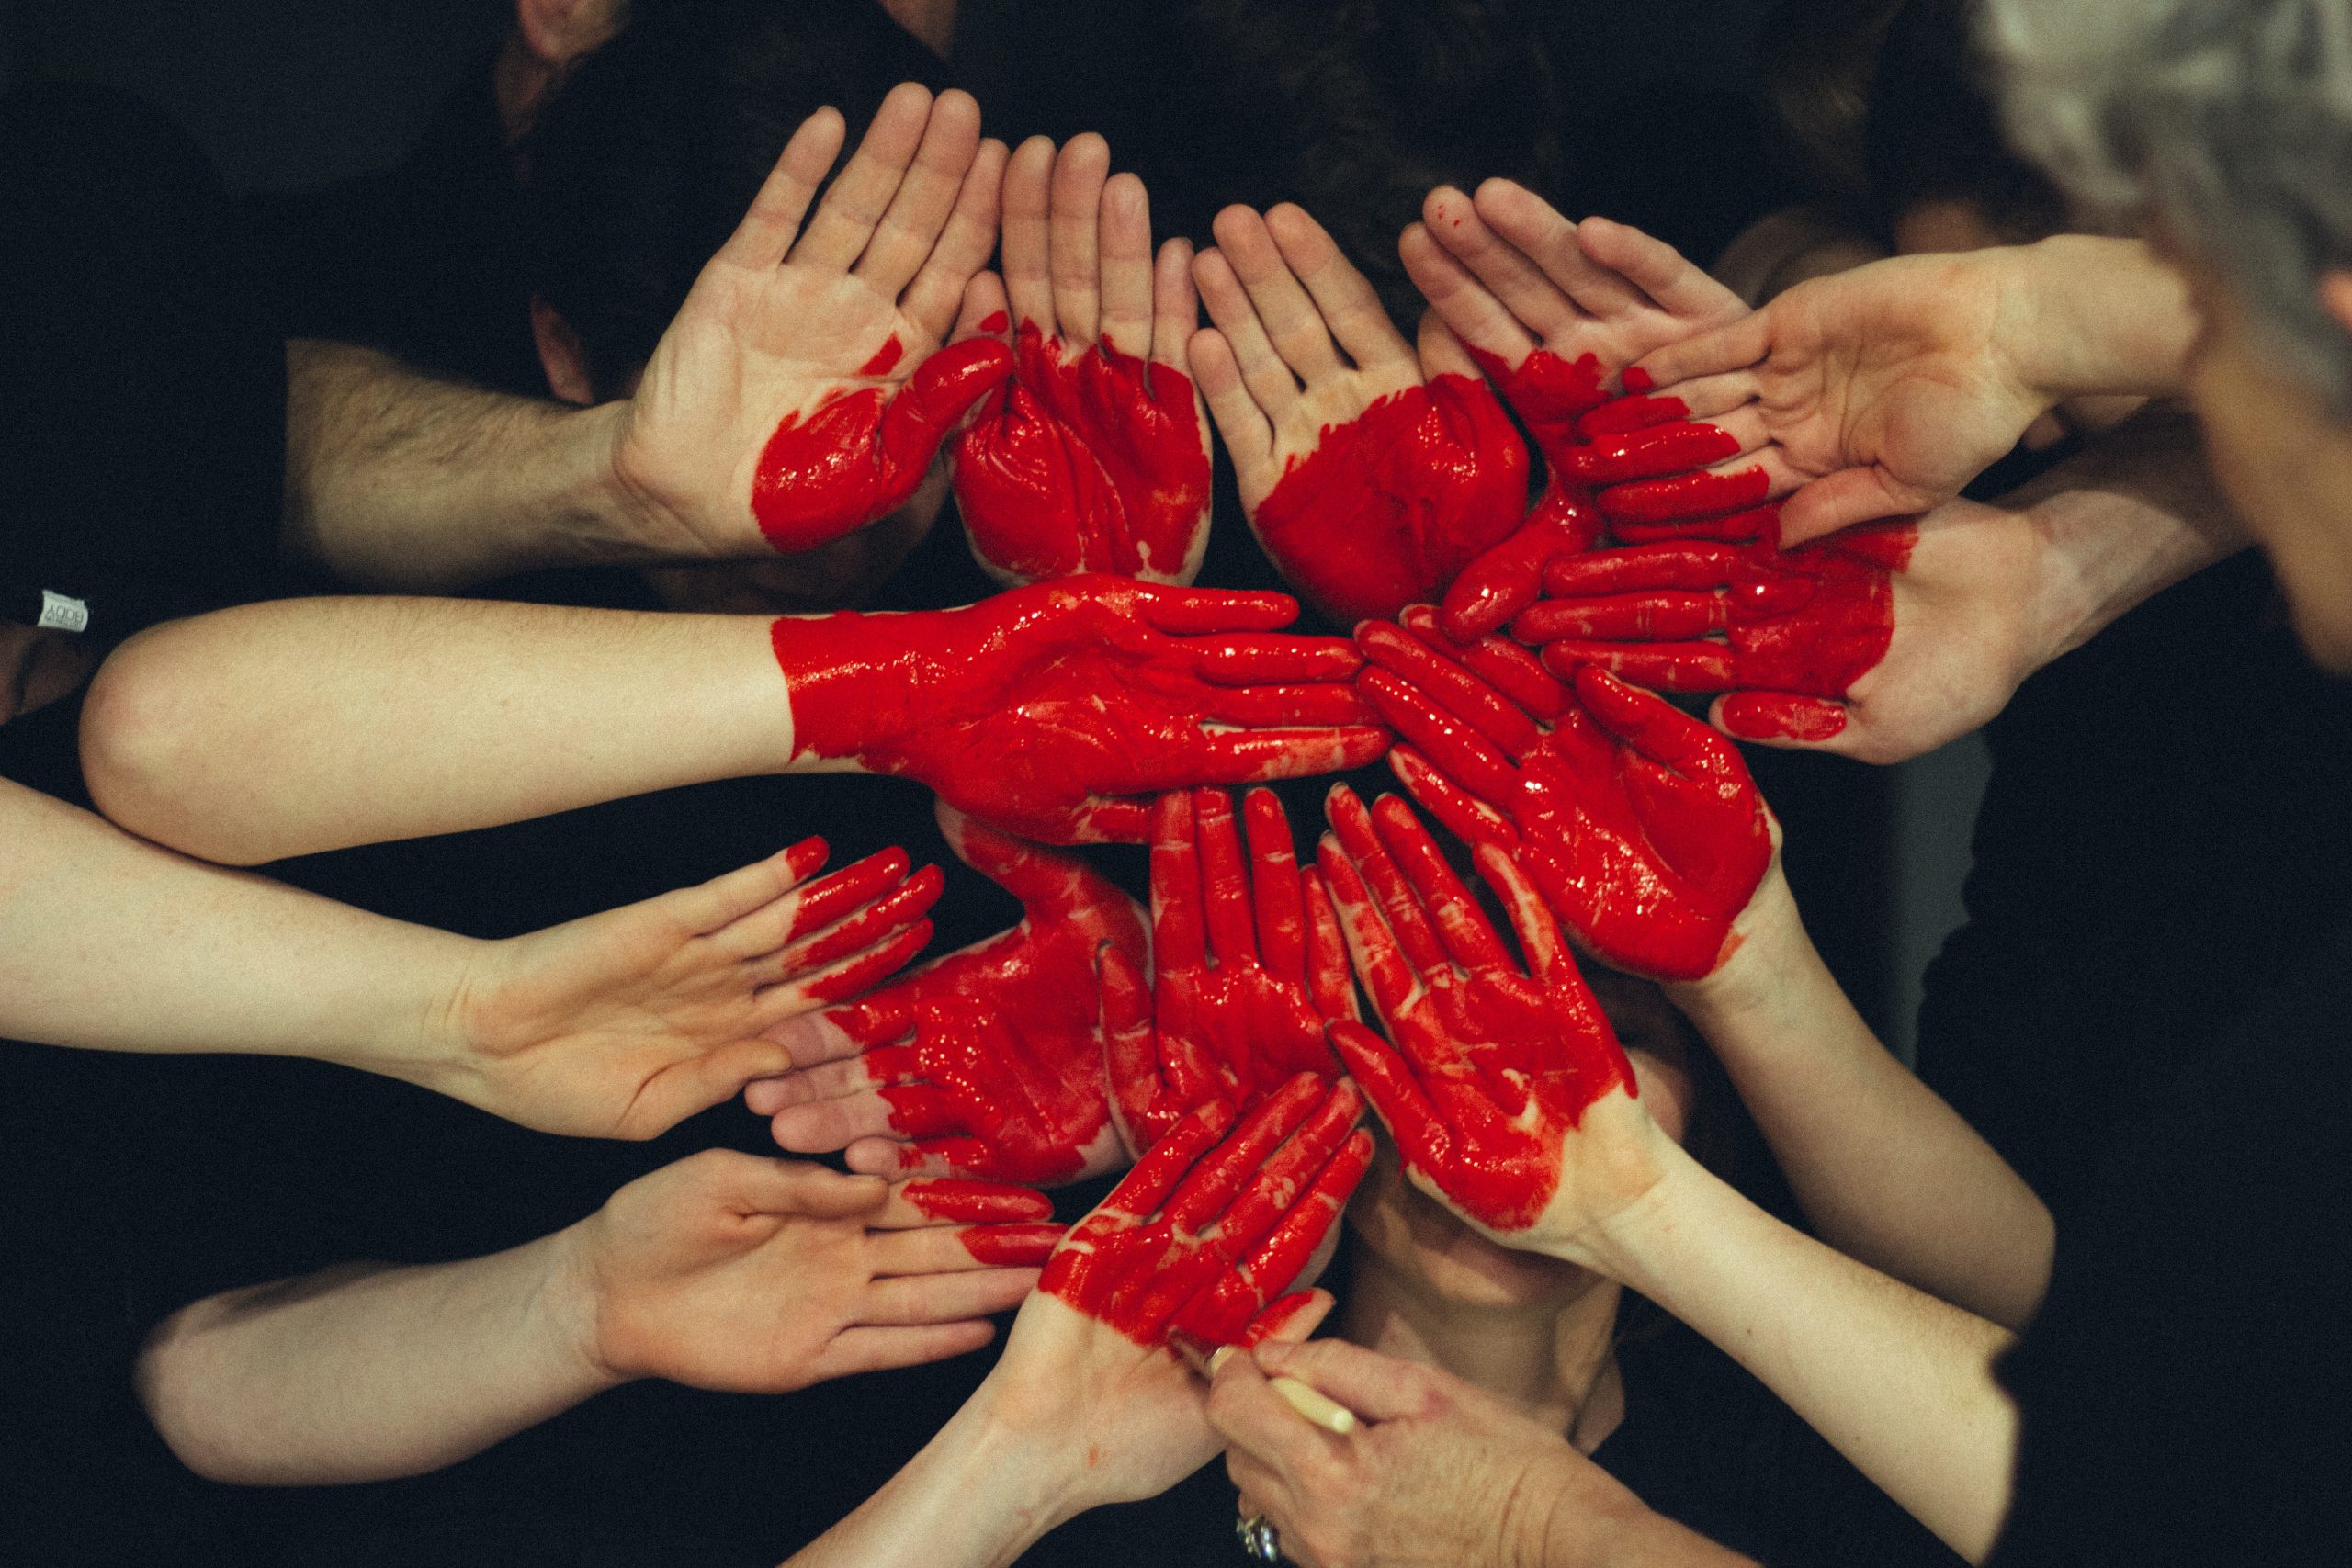 Group of hands together with red paint forming a heart shape.